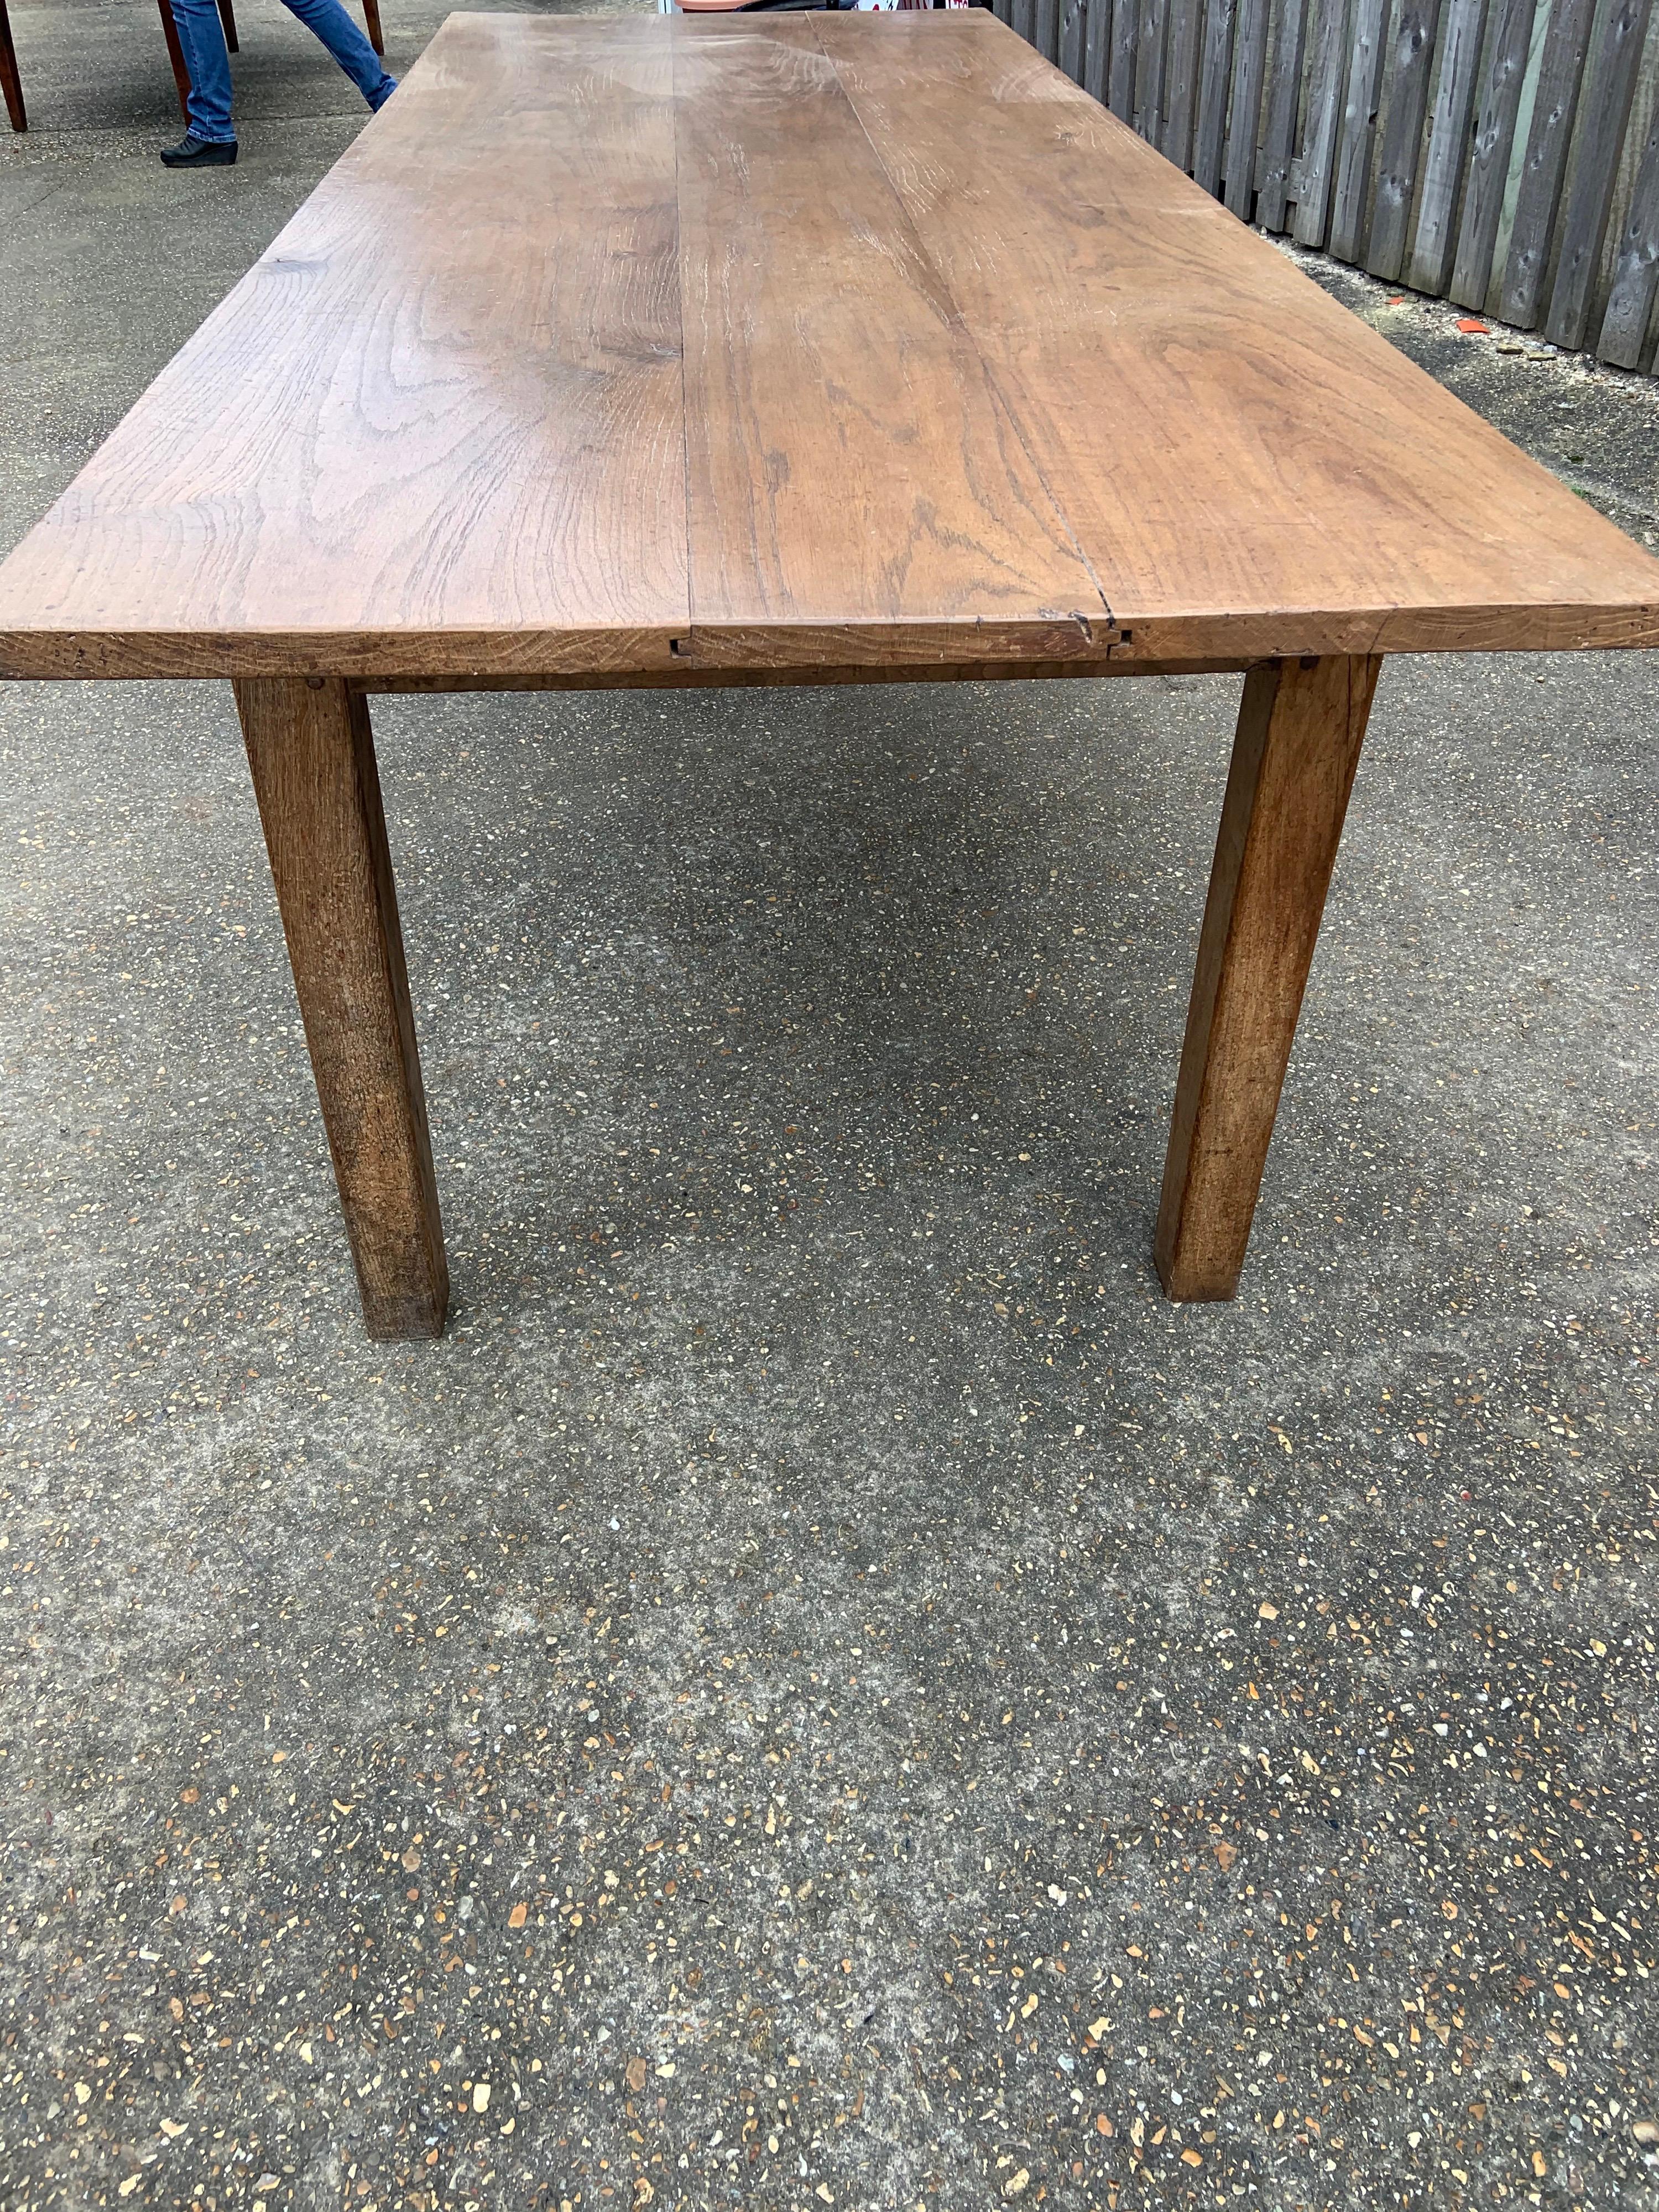 Hand-Crafted 19th Century Elm Farmhouse Table with Square Legs